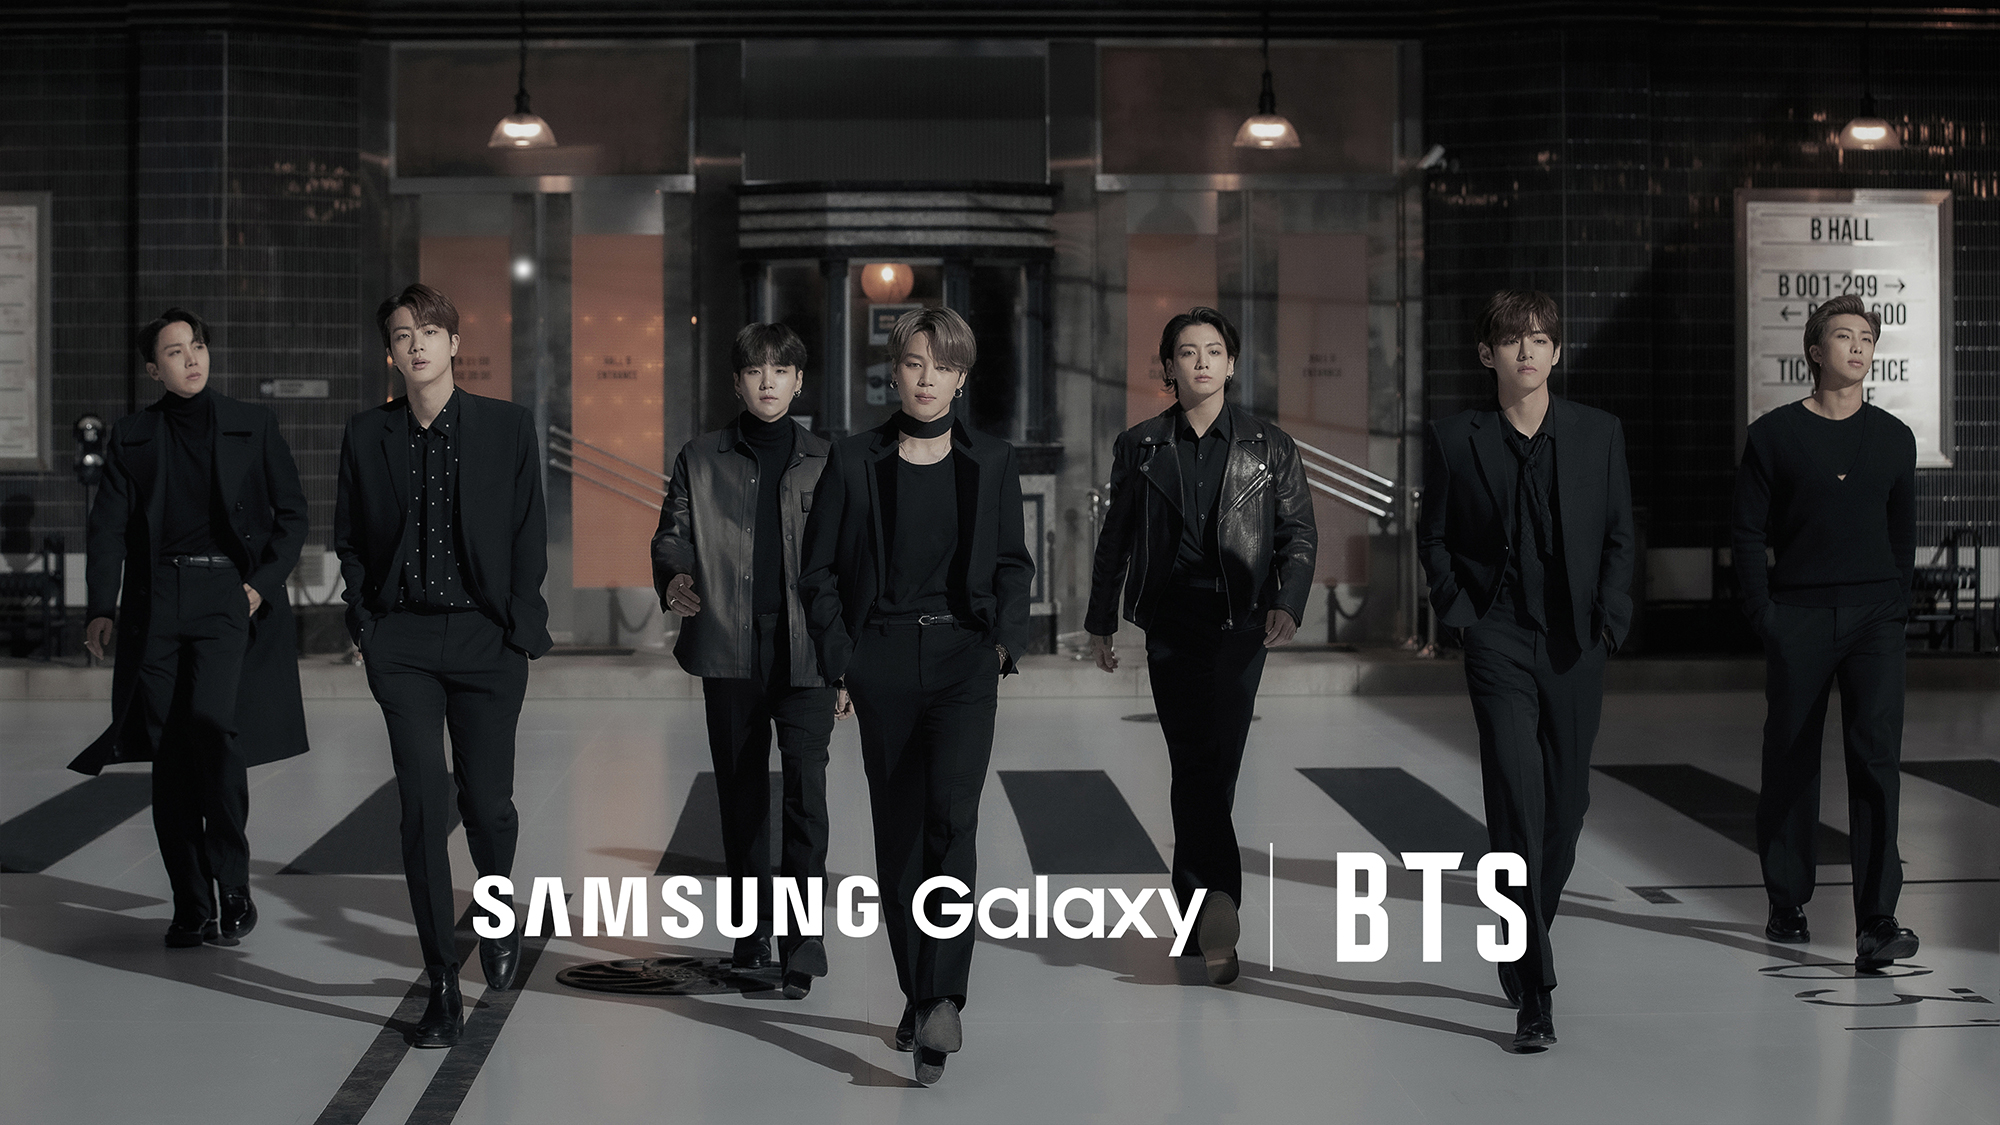 Galaxy and BTS teaser image